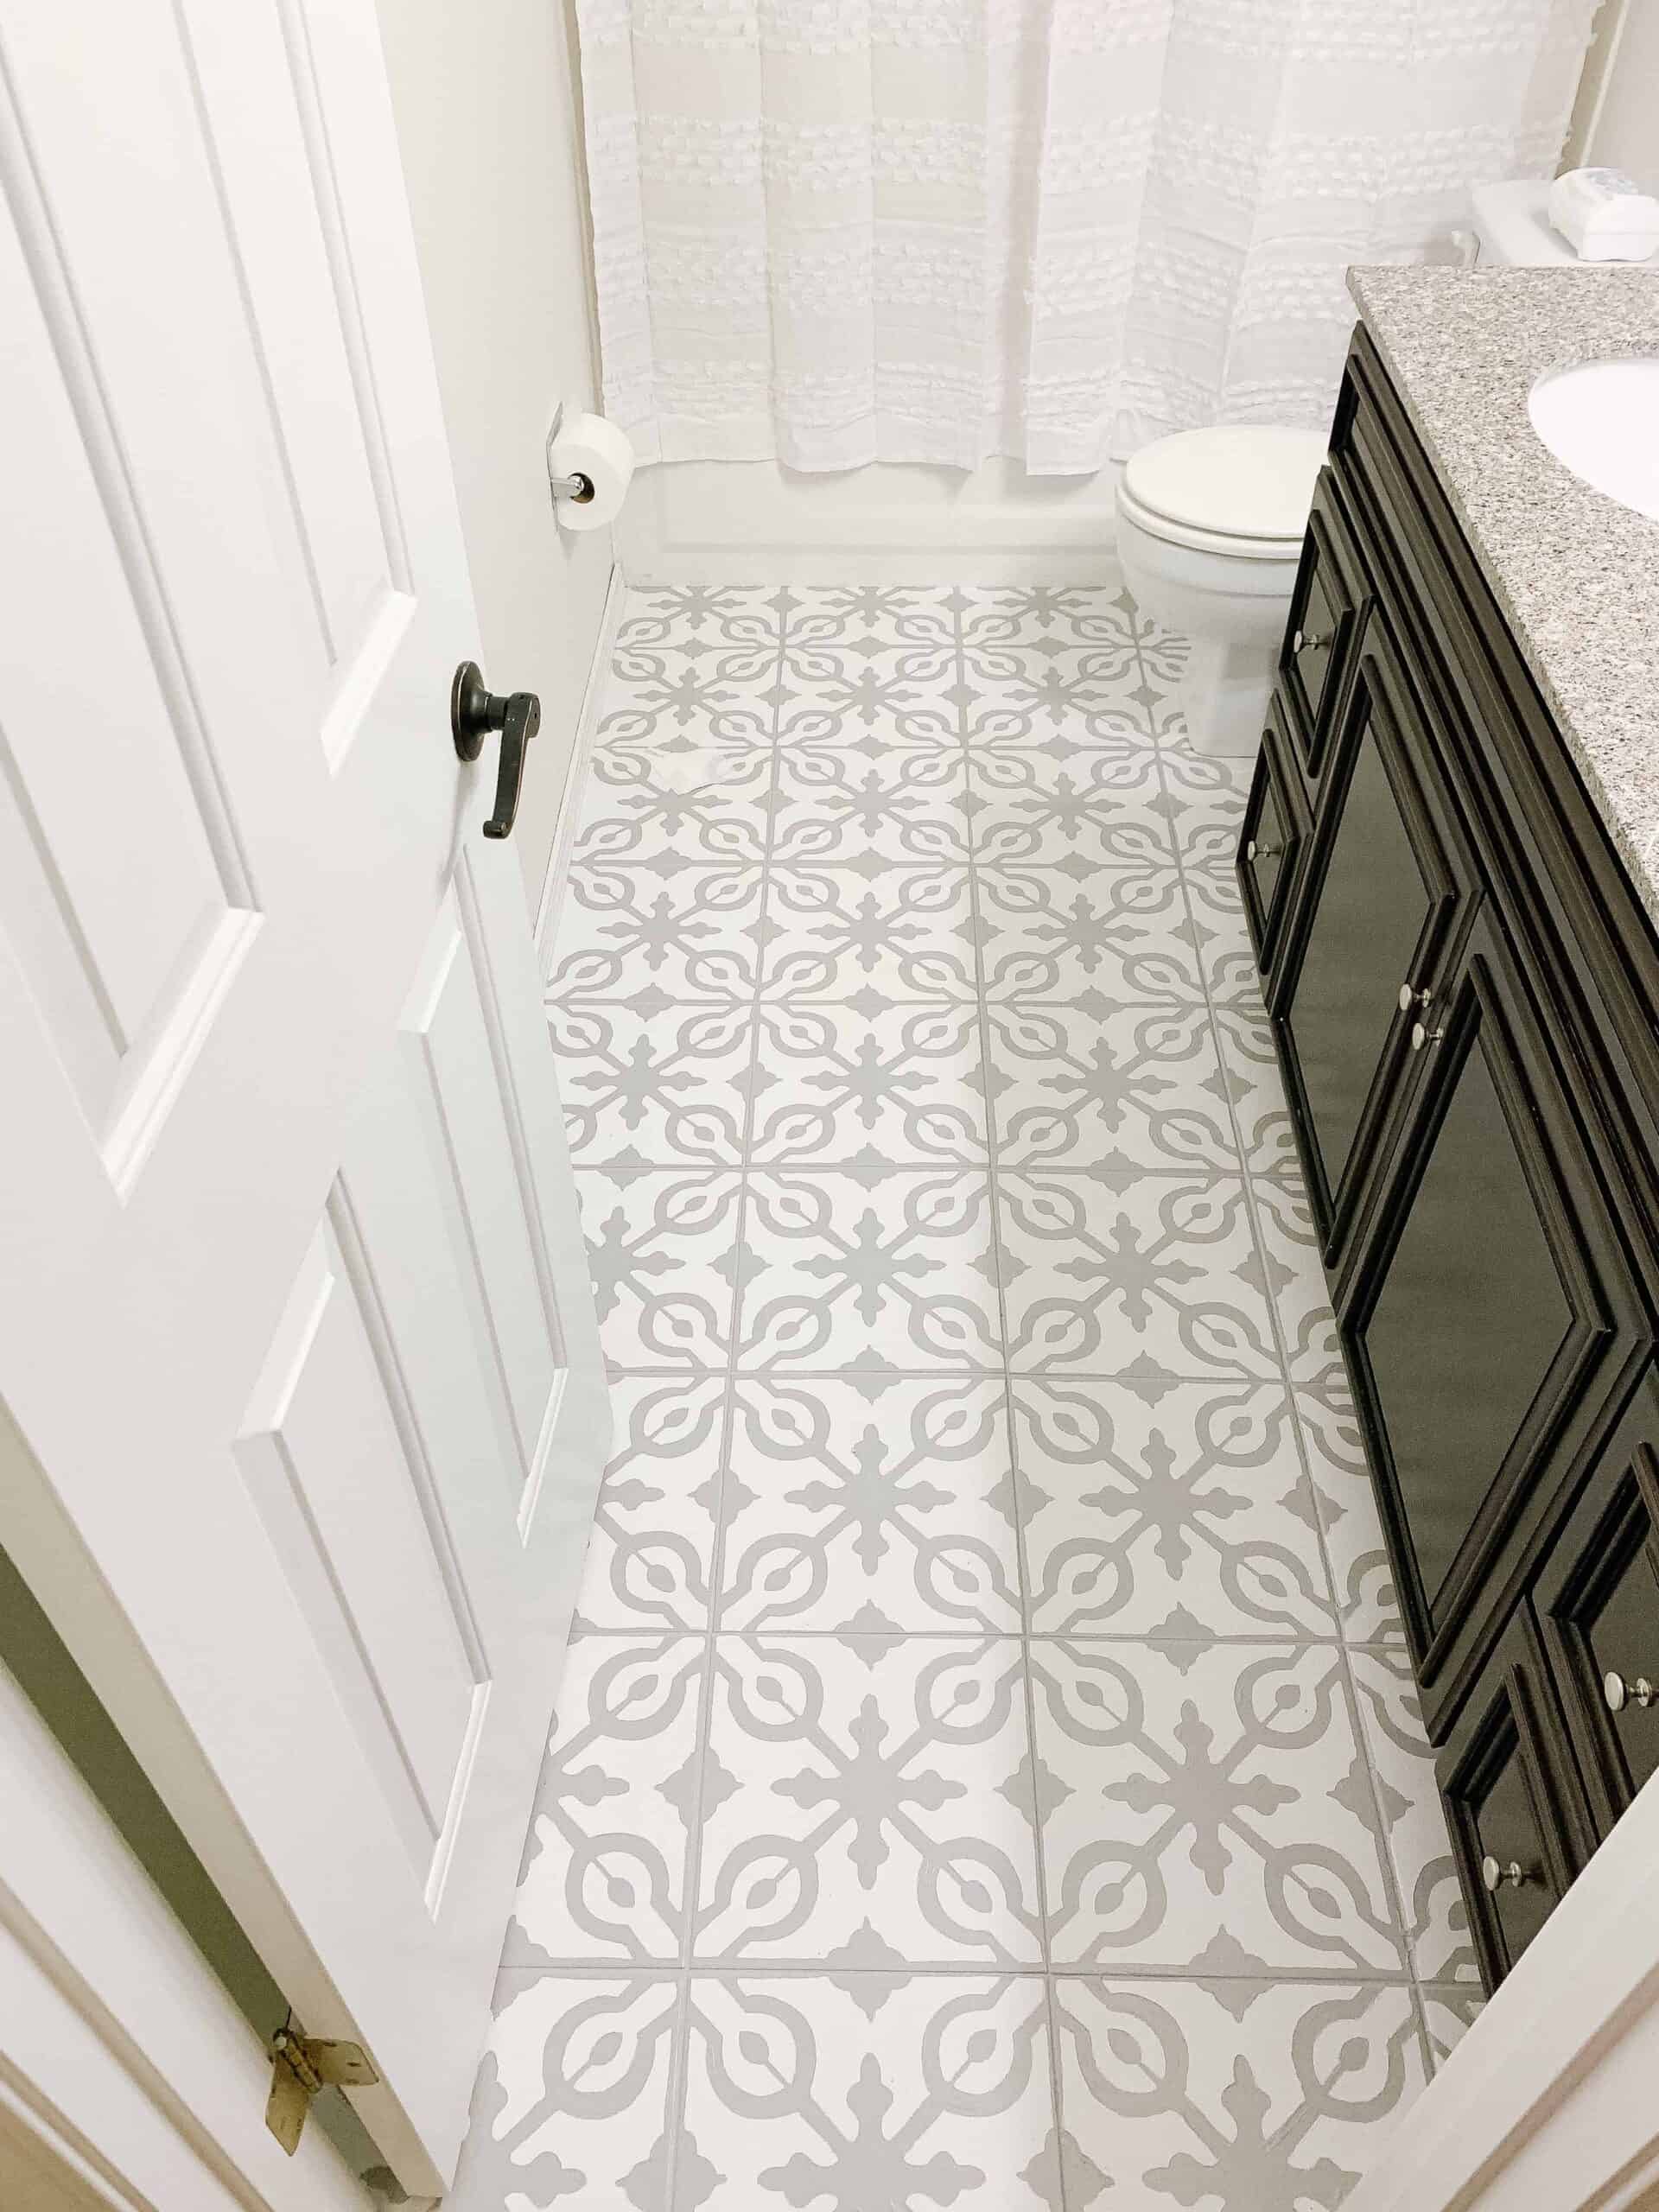 Why Ceramic Tiles Are A Great Option for Your Floors and Walls